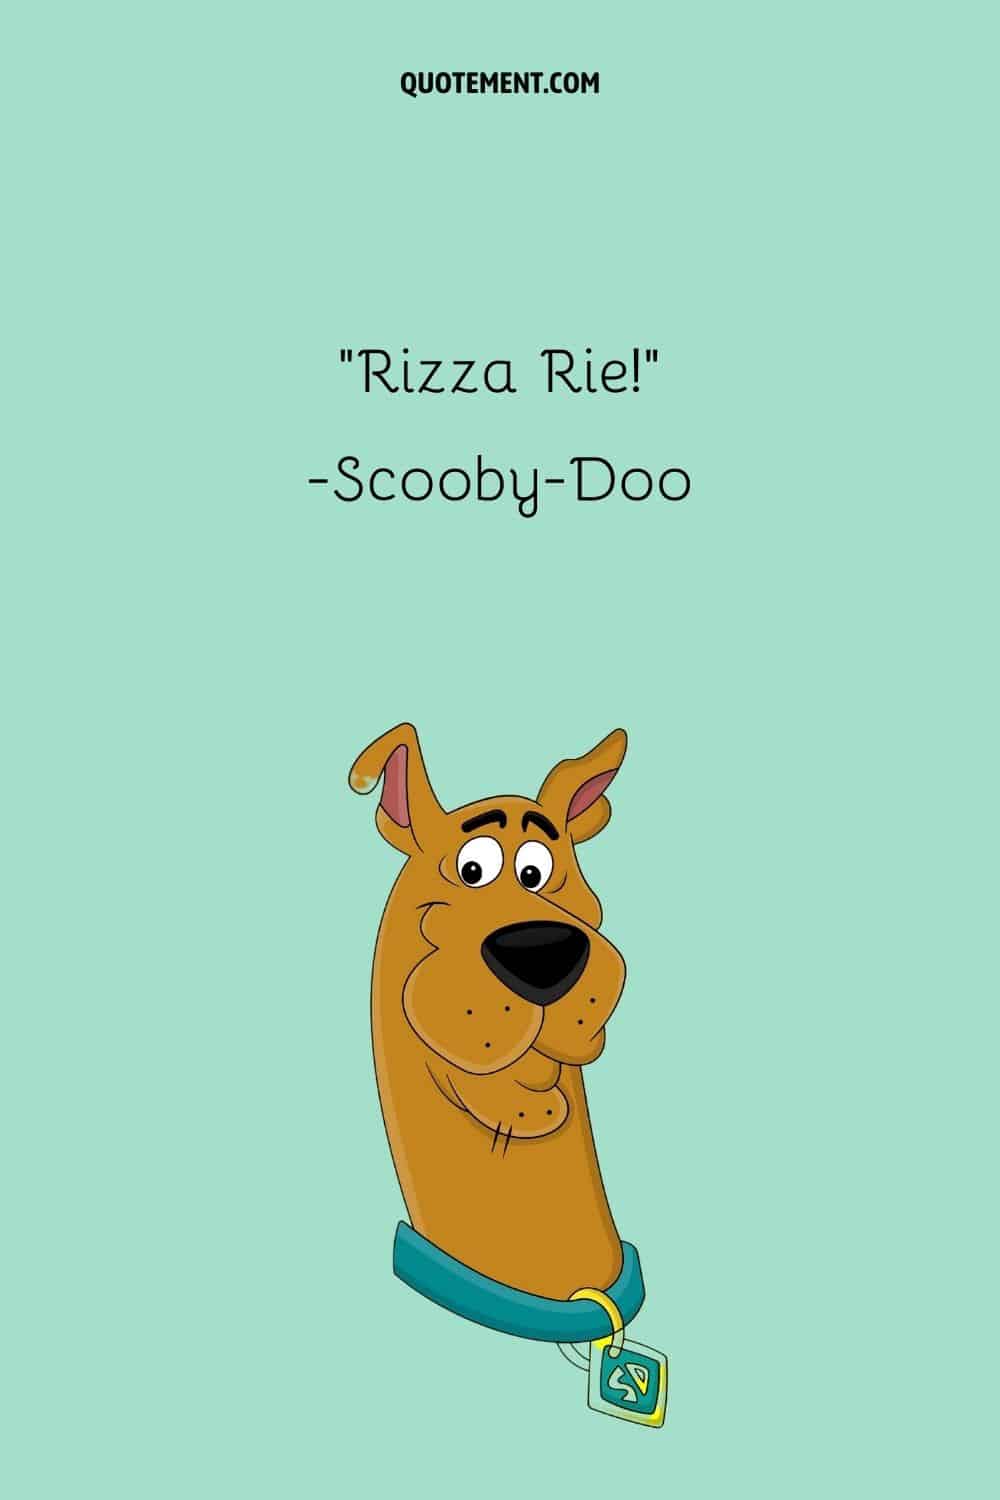 Scooby image representing famous Scooby-Doo character quote
